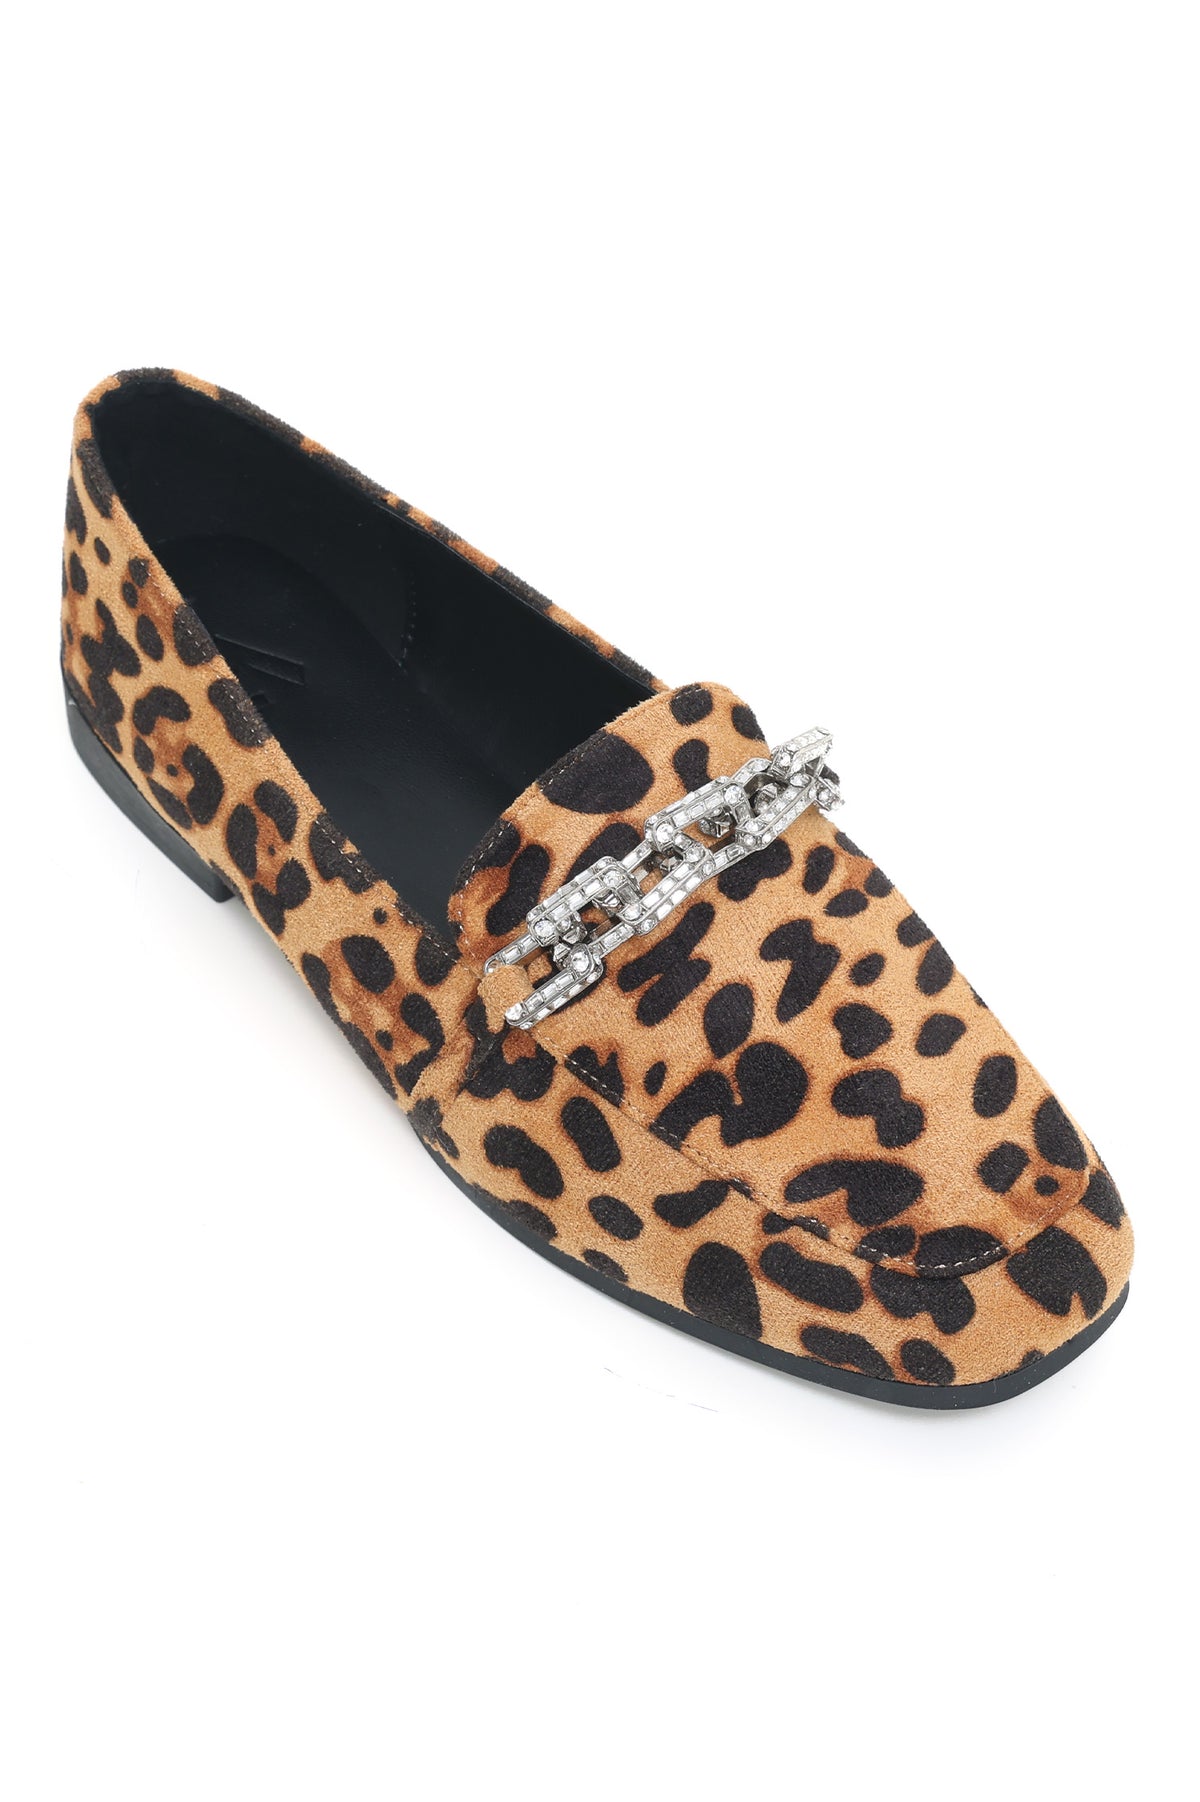 ANIMAL PRINT LOAFERS-LEOPARD